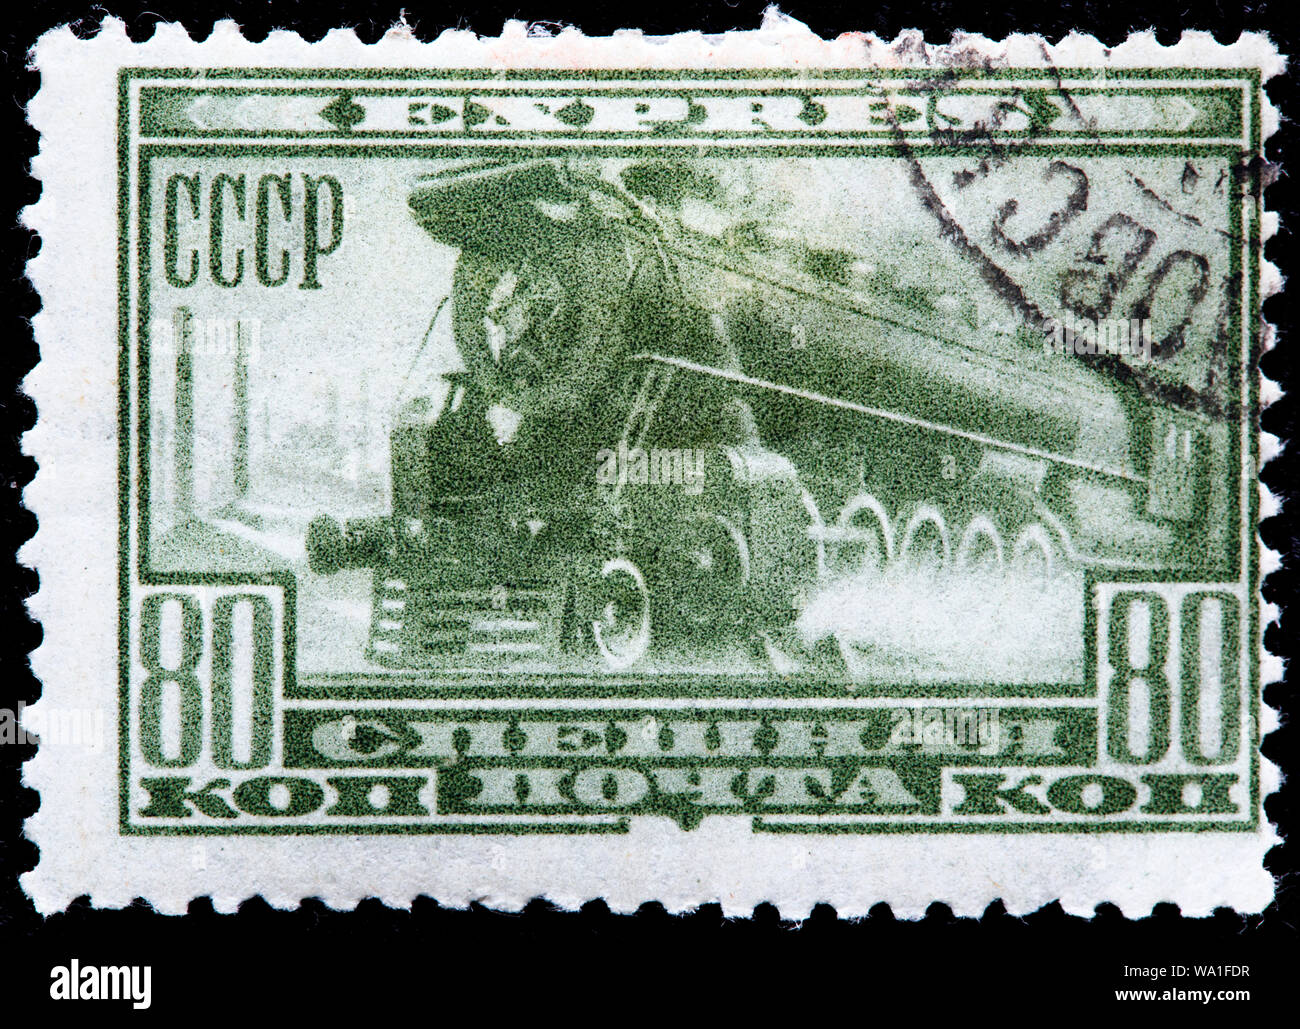 Mail train, Express Mail, postage stamp, Russia, USSR, 1932 Stock Photo